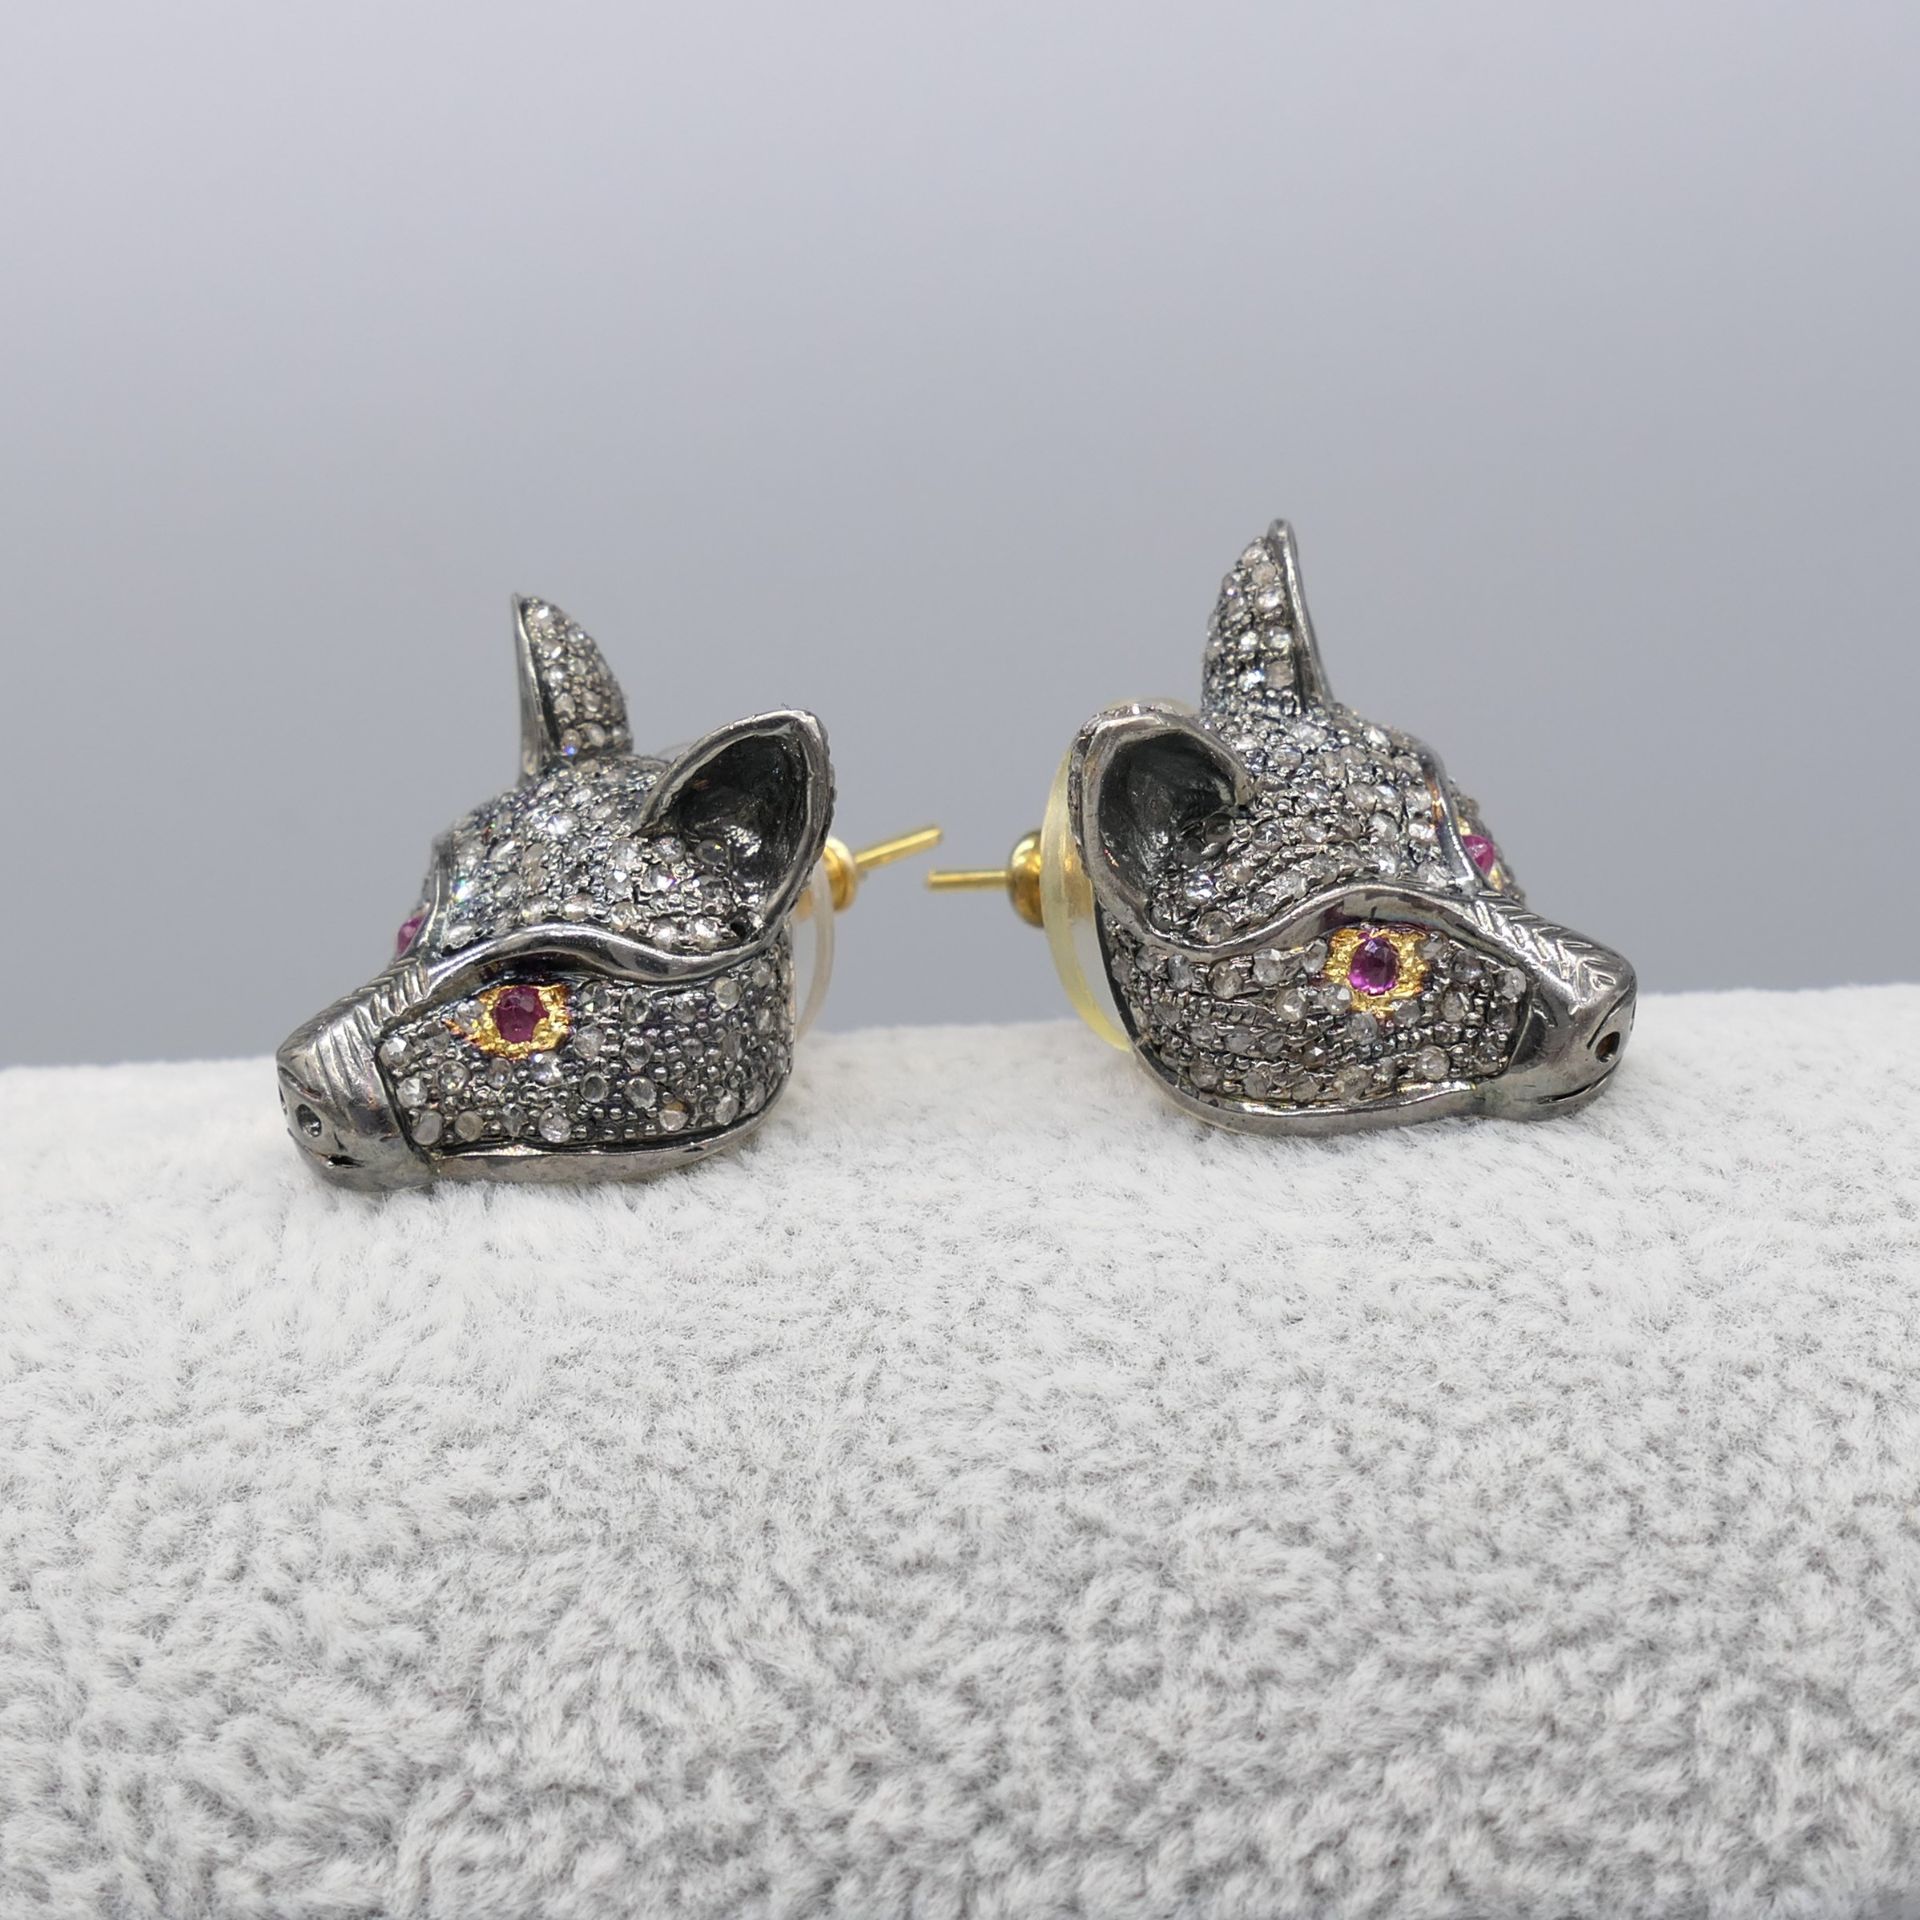 Pair of Unusual Diamond Encrusted Fox-Themed Earrings With Ruby-set Eyes, Boxed - Image 6 of 6